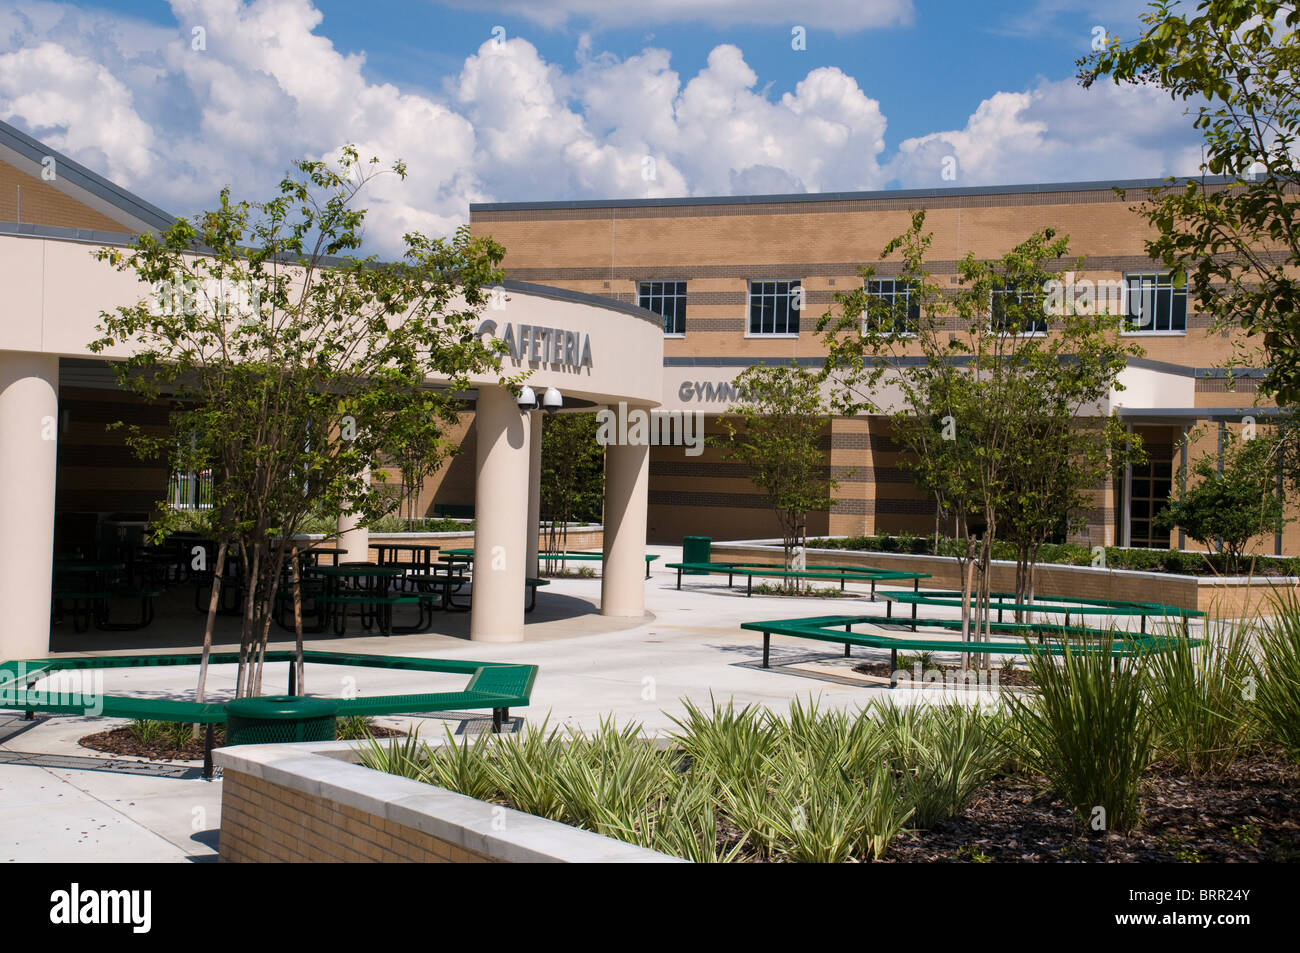 Cafeteria and Gymnasium at Middle School in Florida. Stock Photo